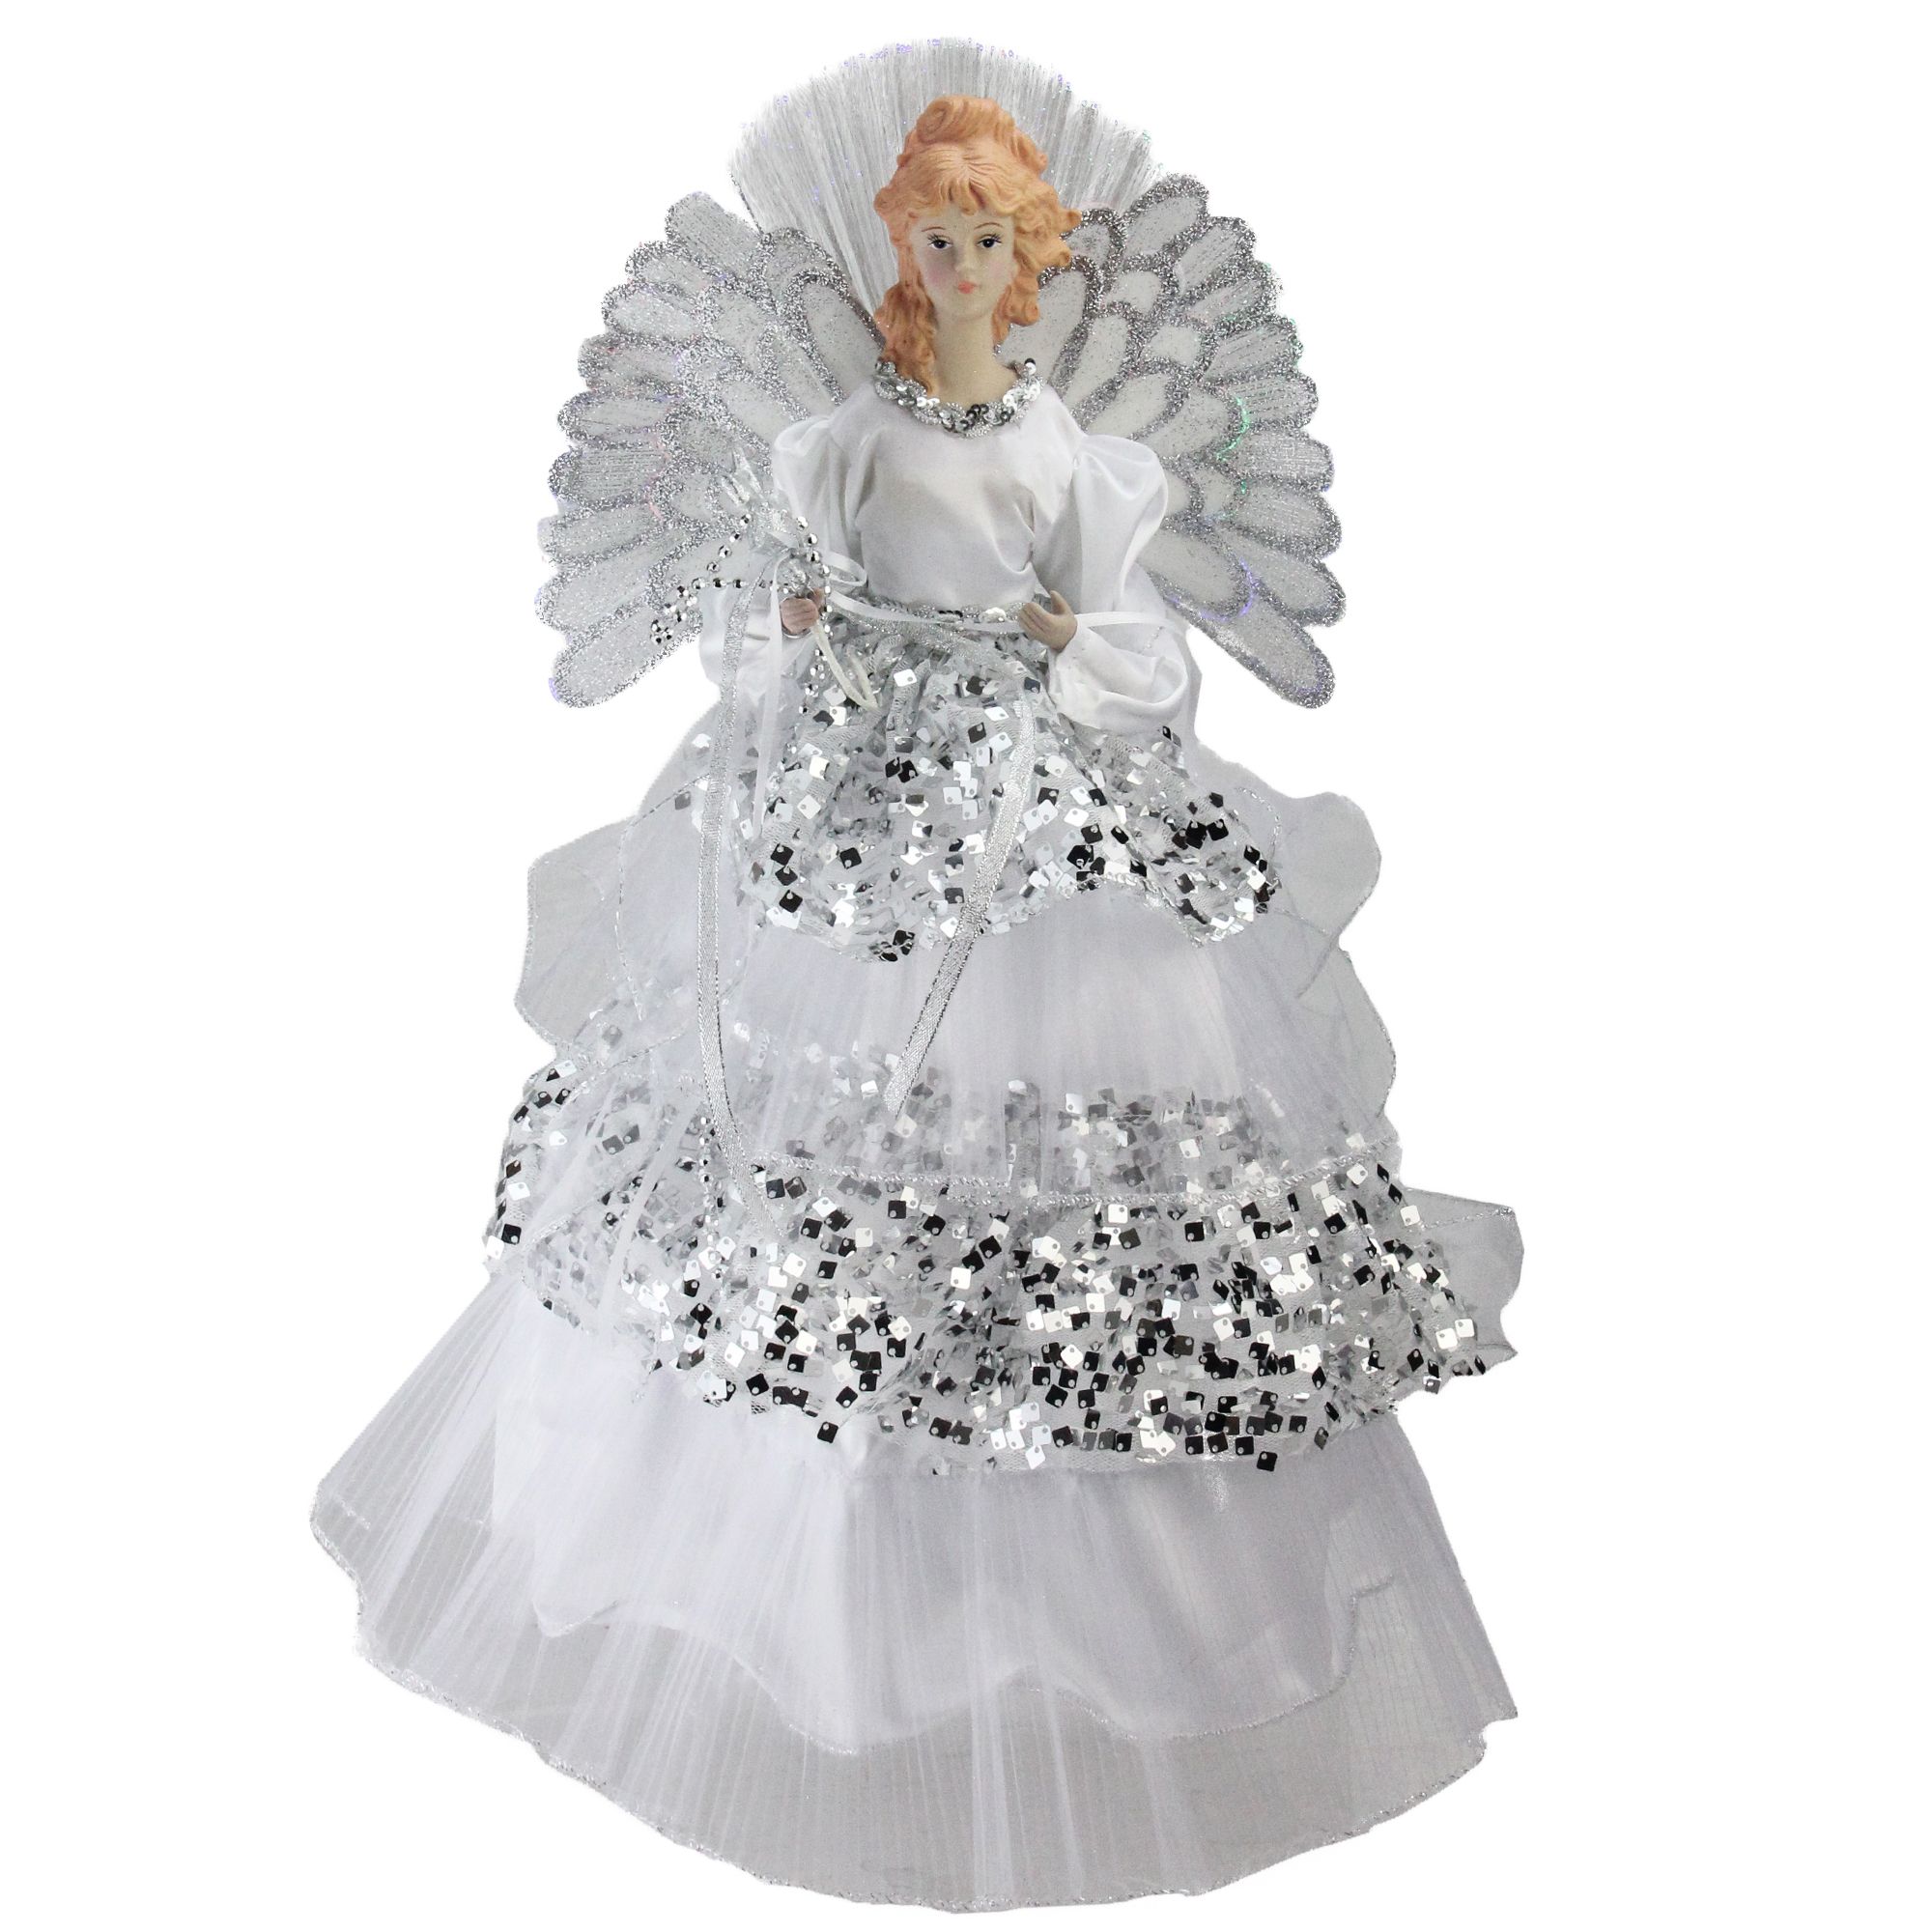 Northlight 16&quot; Lighted Fiber-Optic Angel Sequined Gown Christmas Tree Topper - White and Silver